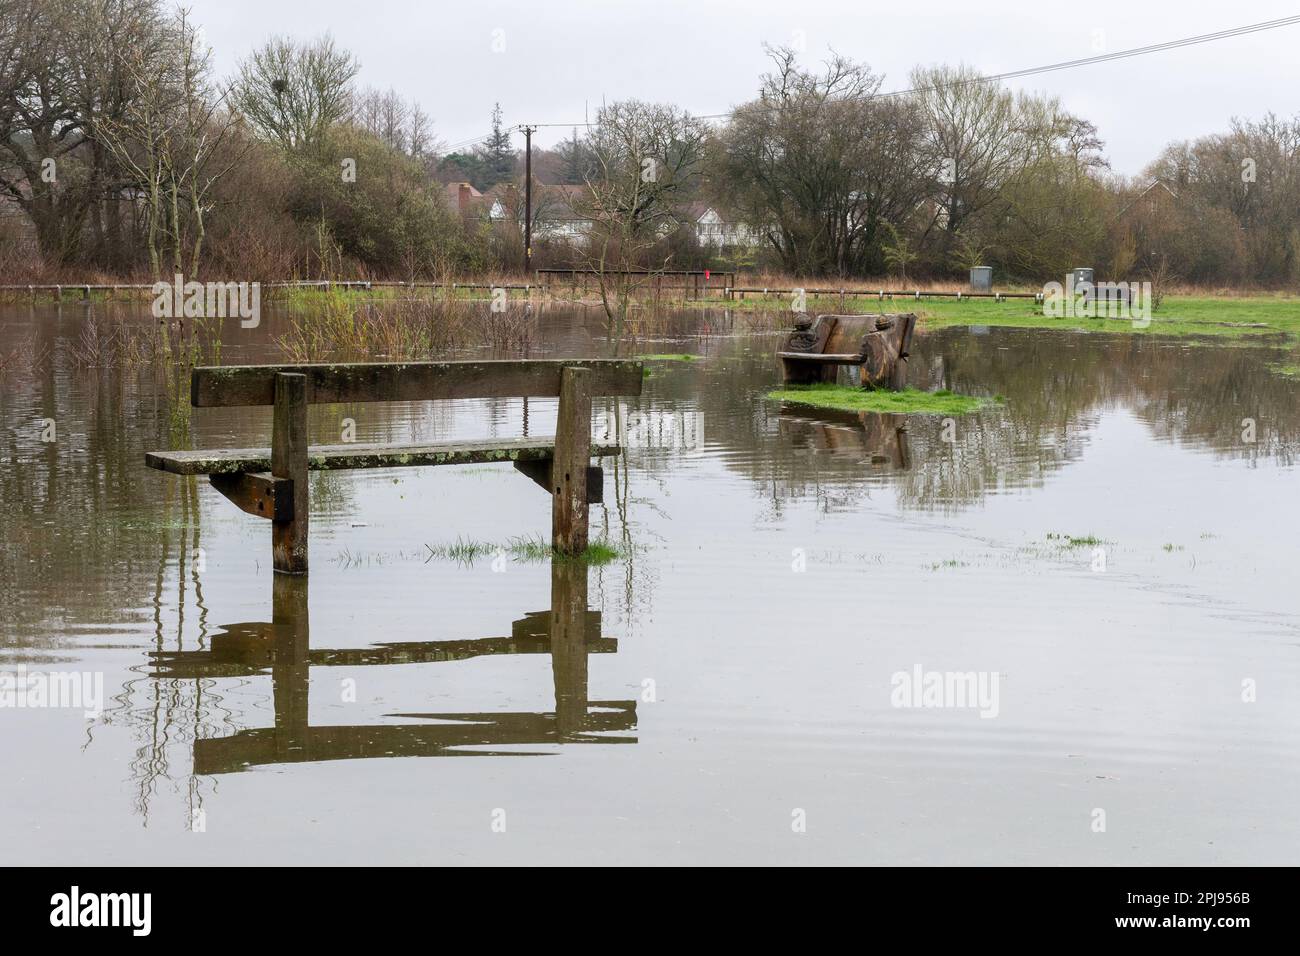 1 April 2023. After the wettest March in England for over 40 years, Edenbrook Country Park in Fleet, Hampshire, UK, is badly flooded. Extreme weather such as high rainfall flooding may be linked to climate change. Stock Photo